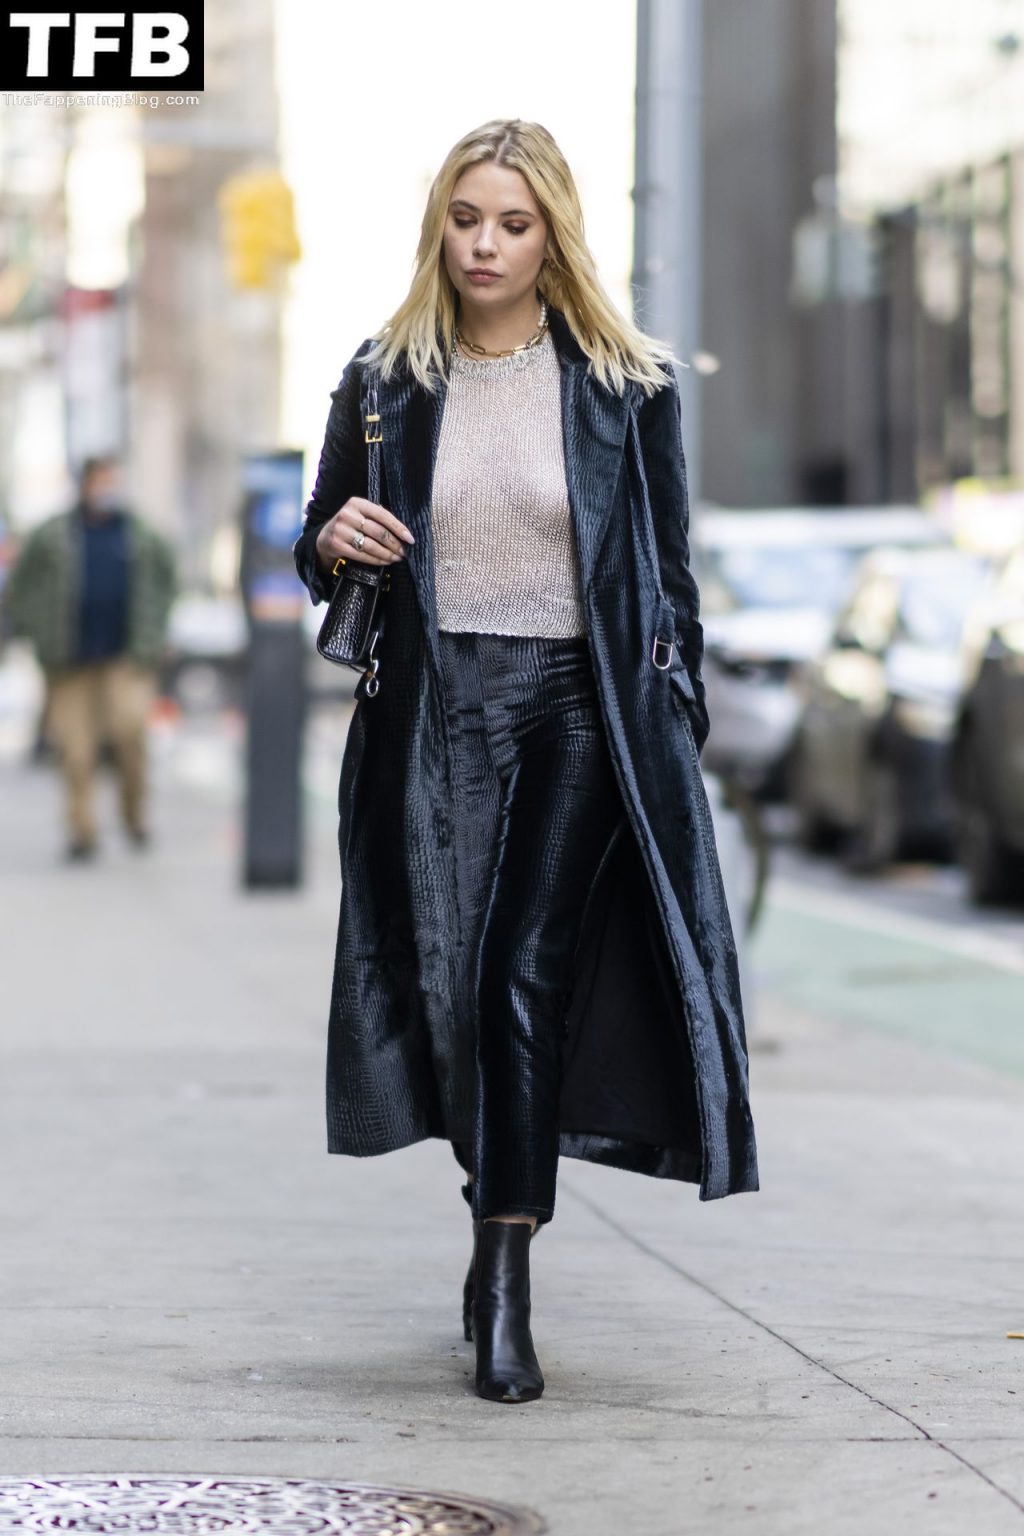 Ashley Benson Sexy The Fappening Blog 4 1 1024x1536 - Braless Ashley Benson Looks Stylish While Heading to a Meeting in NYC (20 Photos)